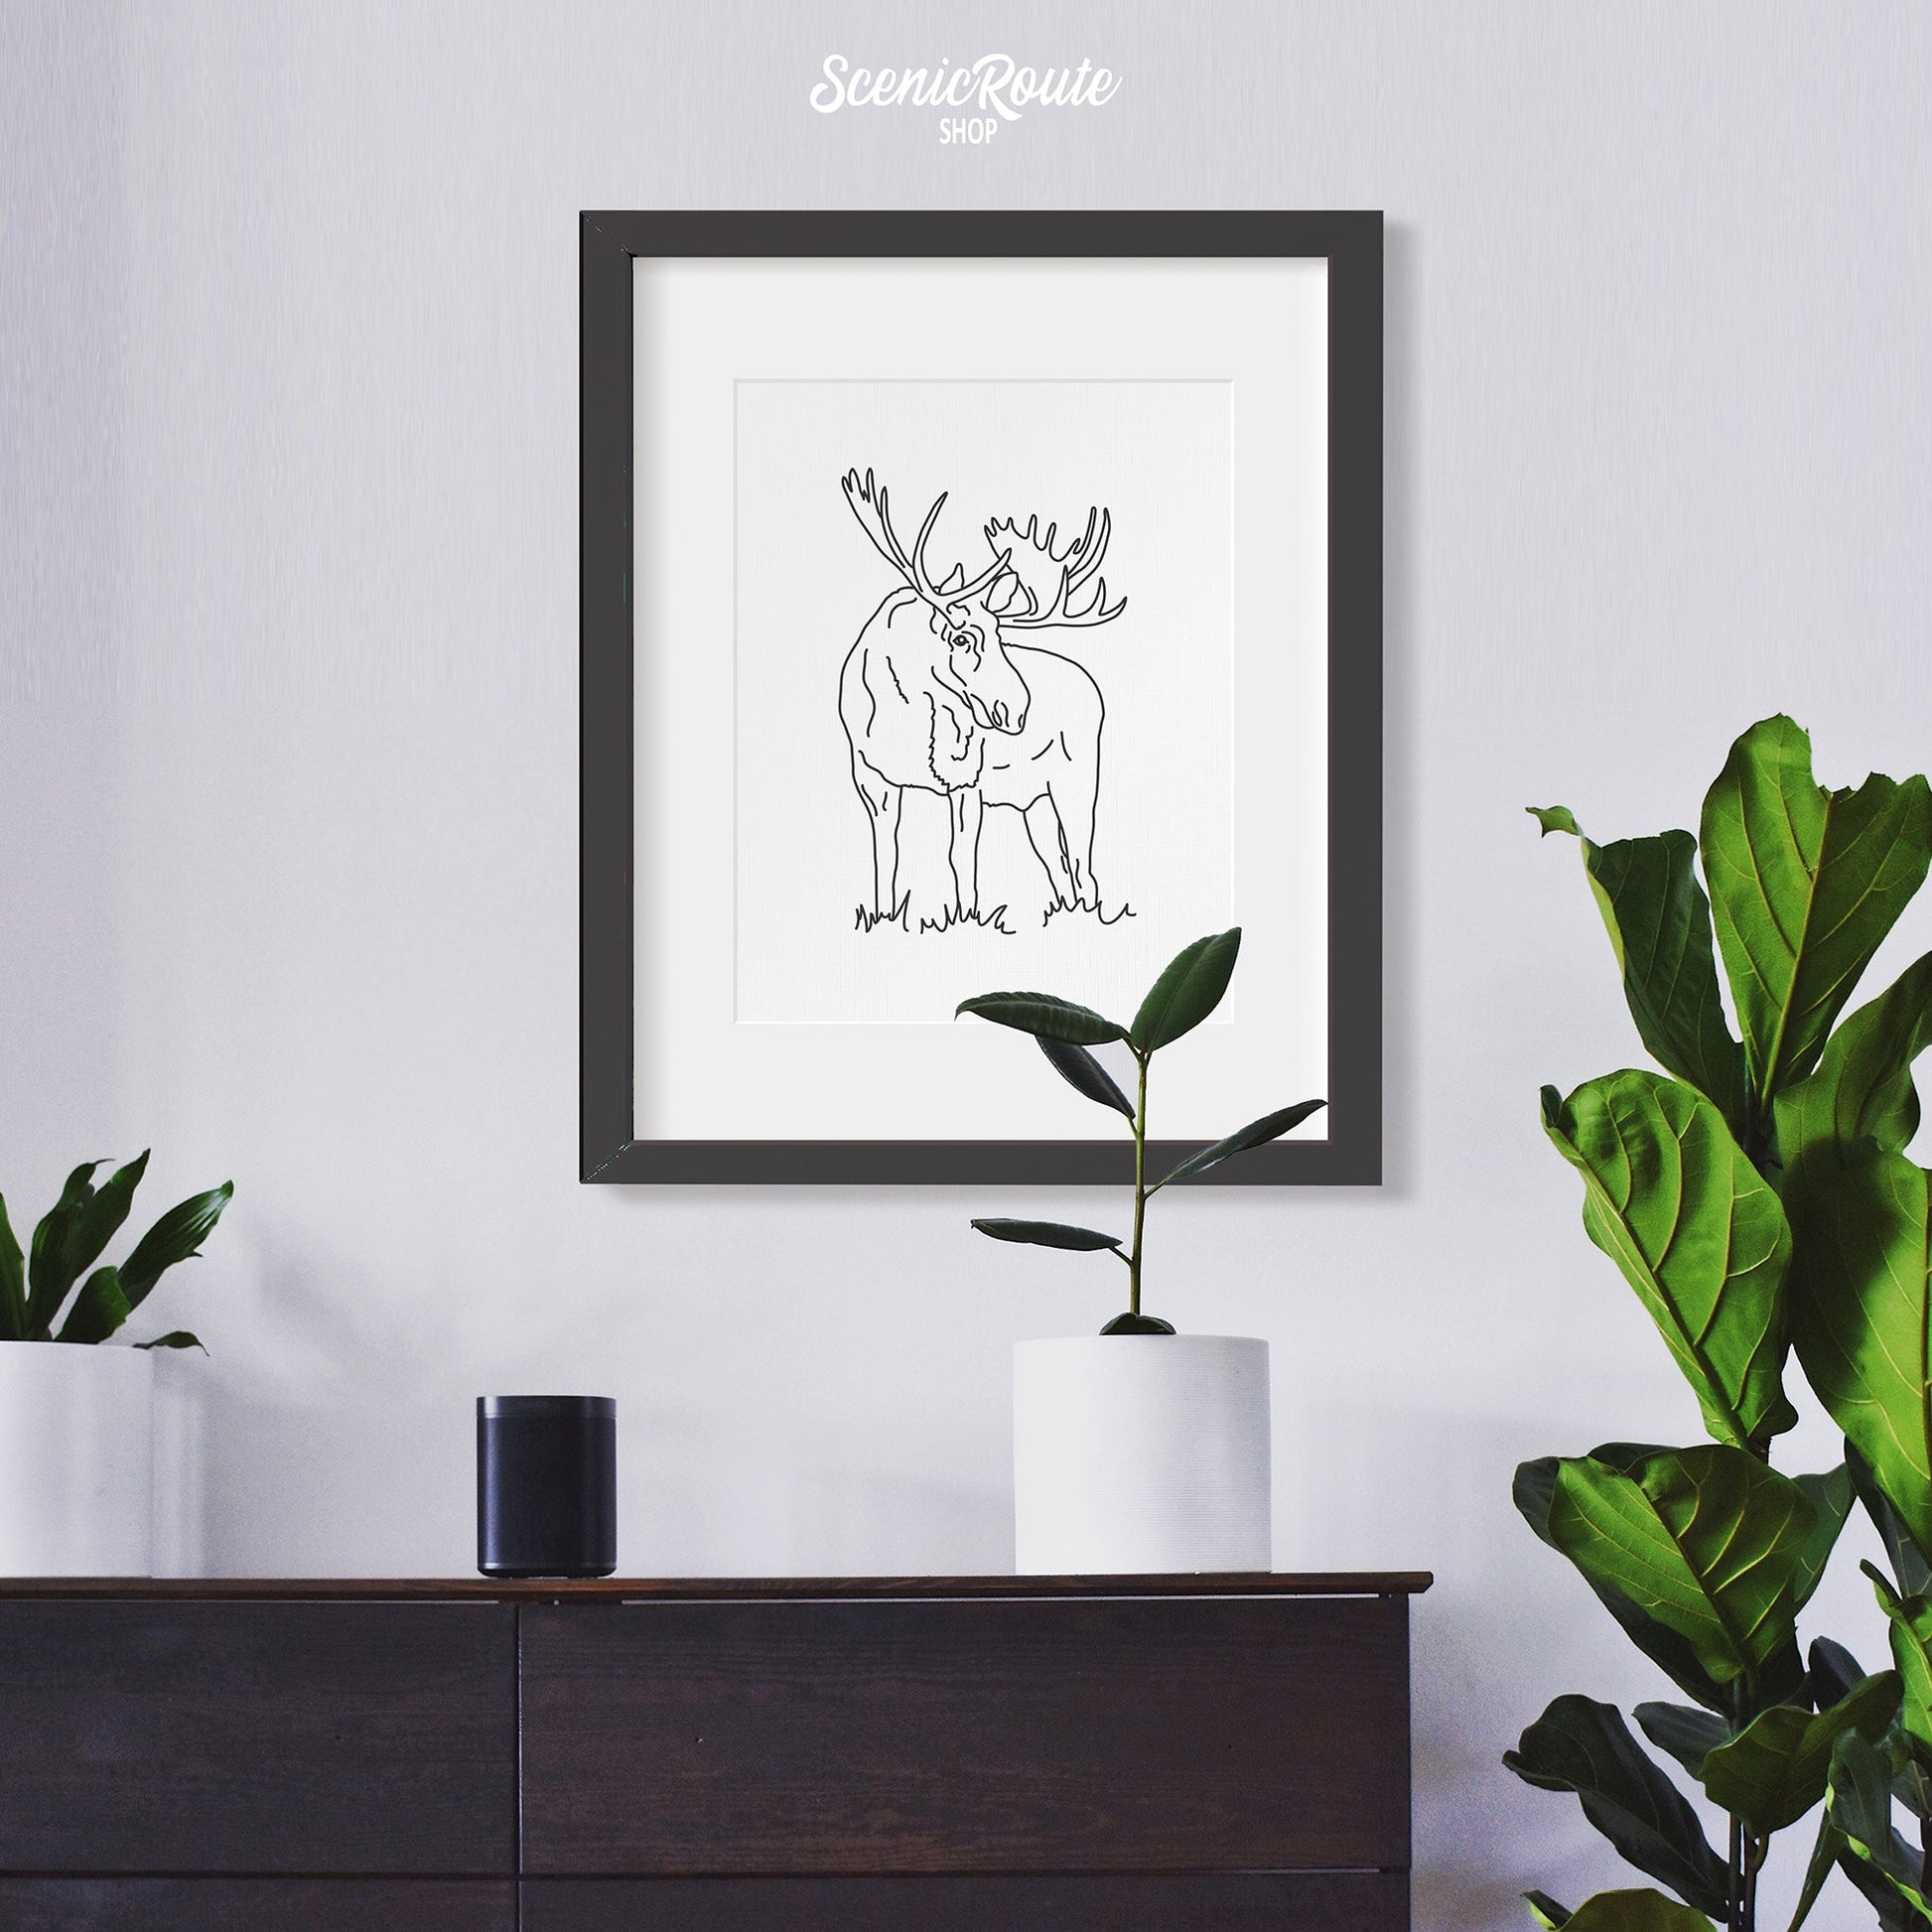 A framed line art drawing of a Moose above a dresser with plants